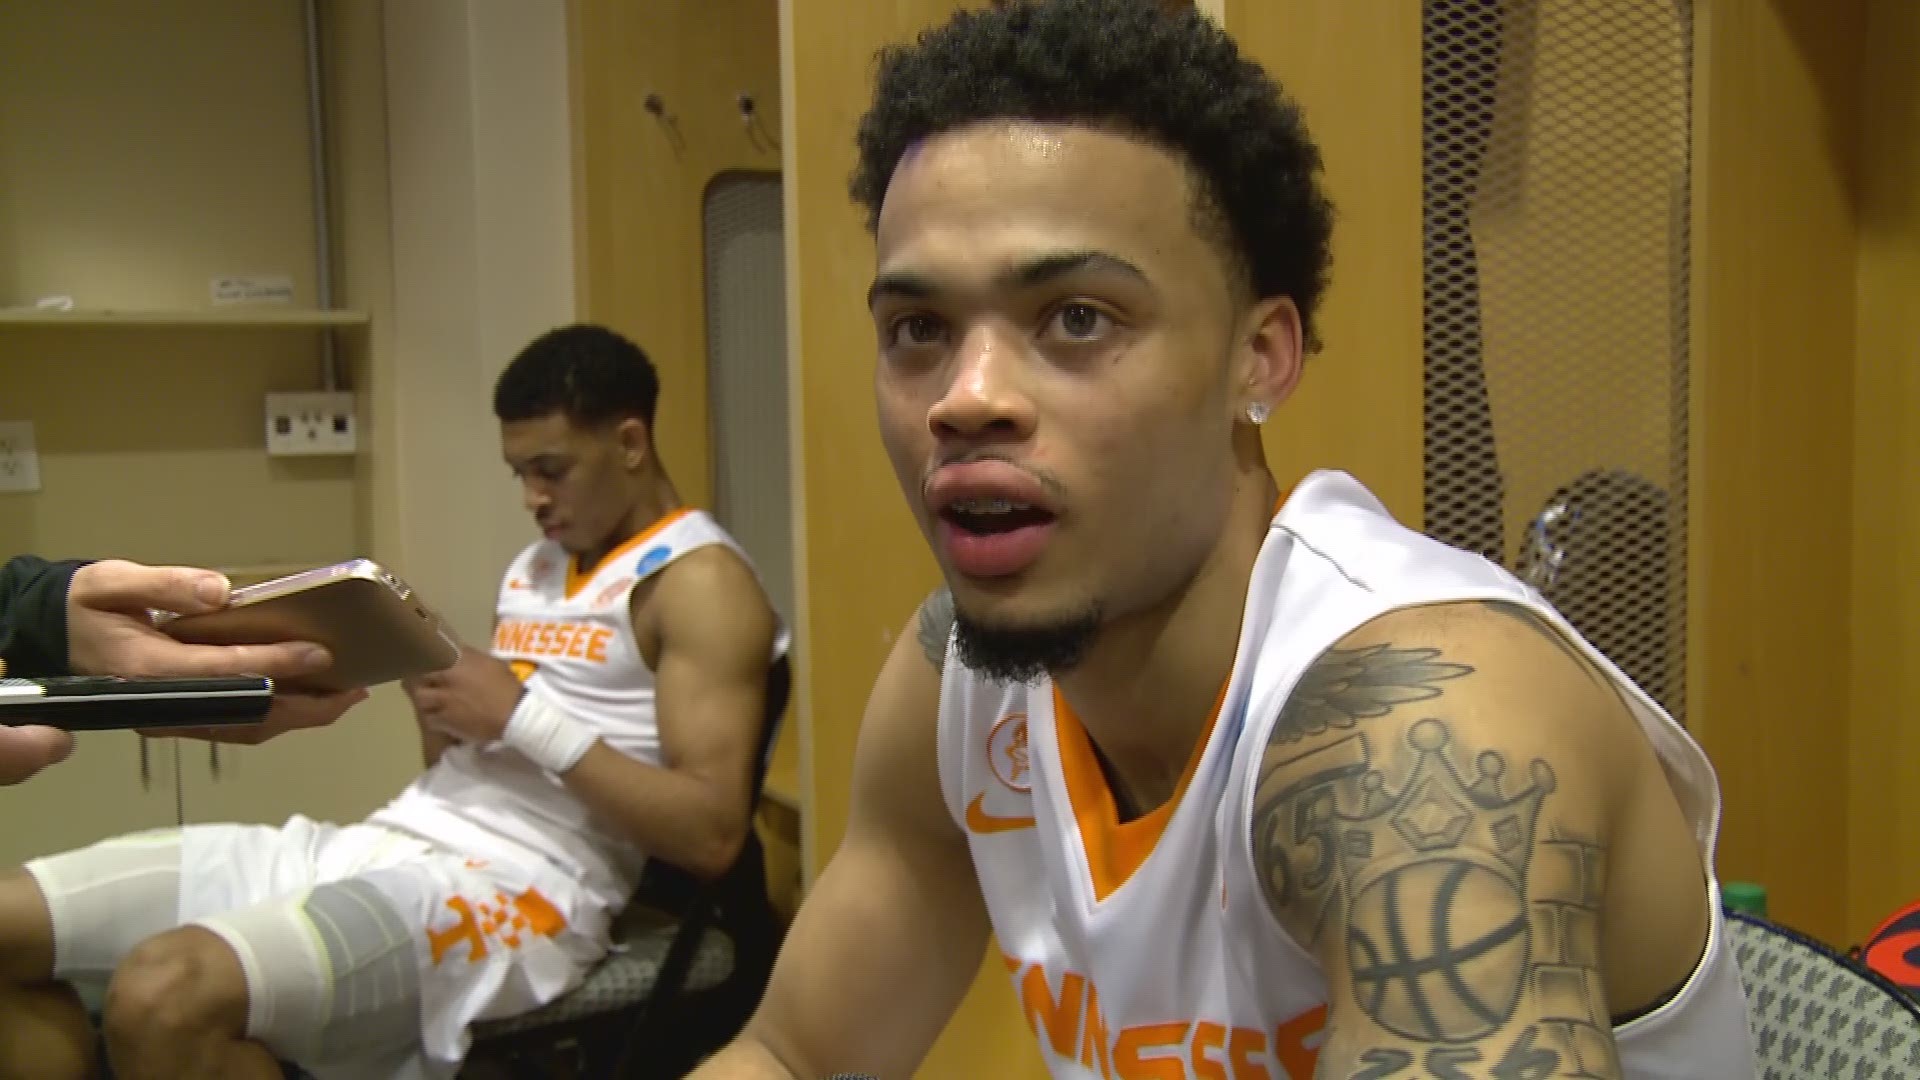 Lamonte Turner scored 19 points and dished out a career-high 9 assists in the Vols 73-47 win over Wright State in the first round of the 2018 NCAA Tournament.